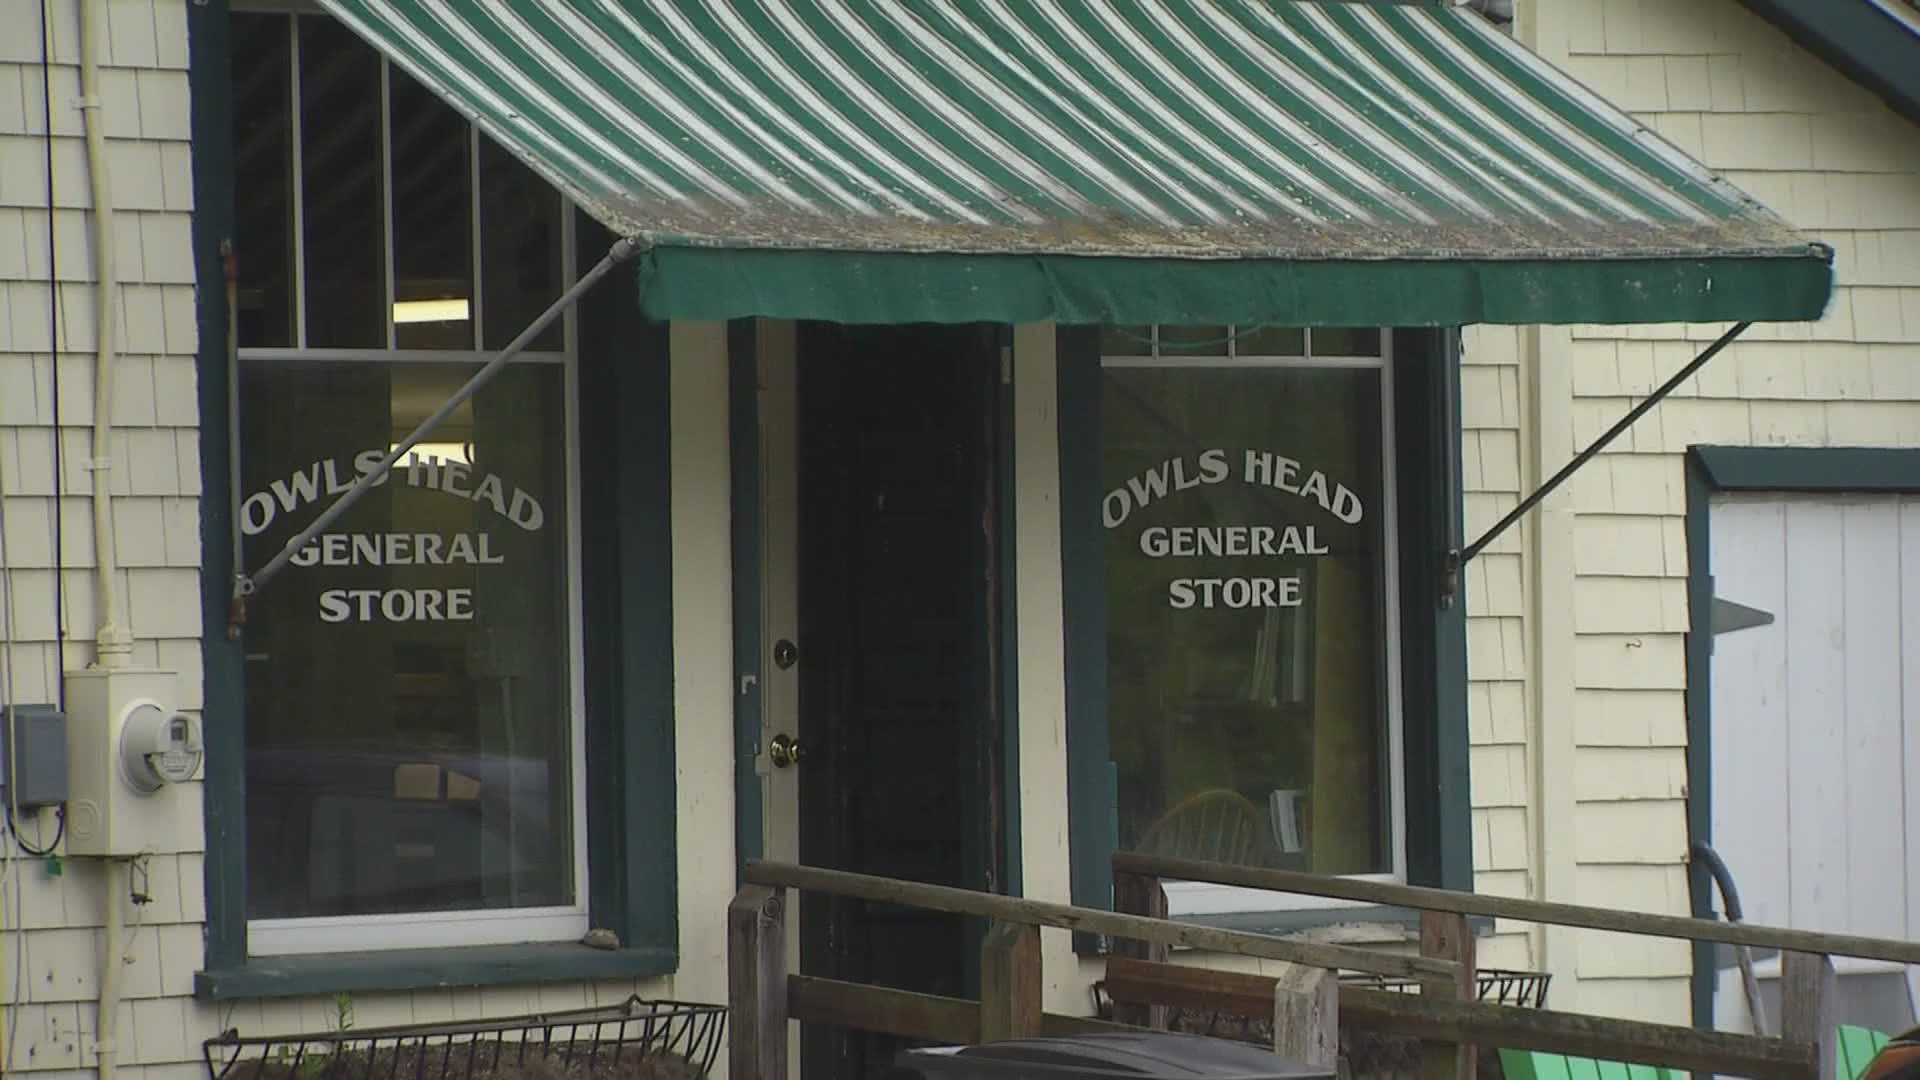 Owls Head General Store reopens under new owner